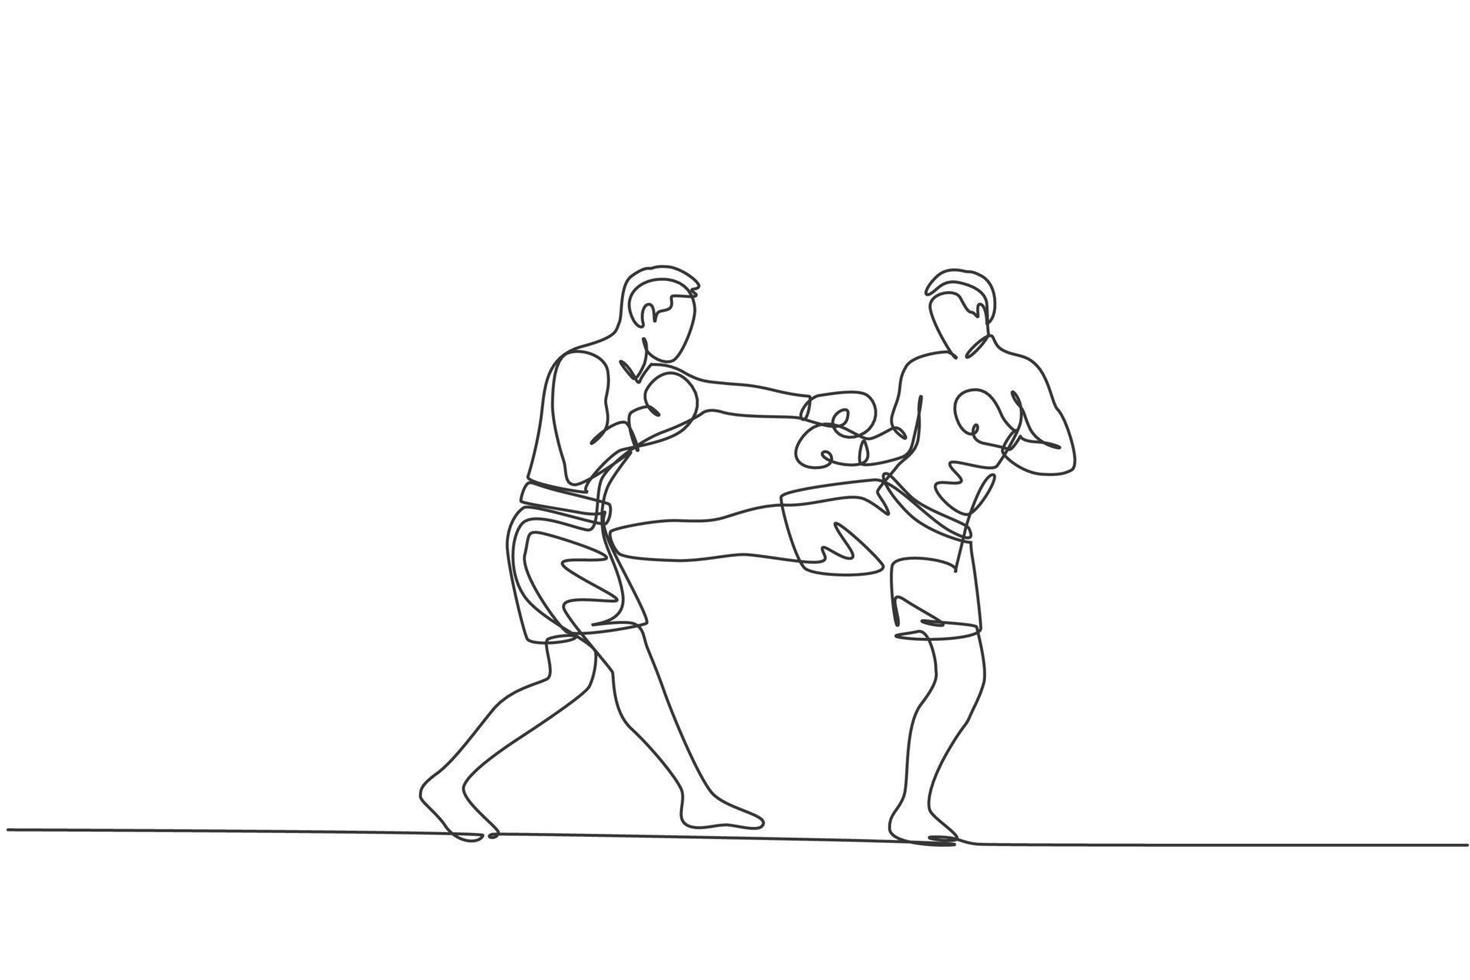 One single line drawing of young energetic man kickboxer fighting in local tournament at boxing arena vector illustration graphic. Healthy lifestyle sport concept. Modern continuous line draw design